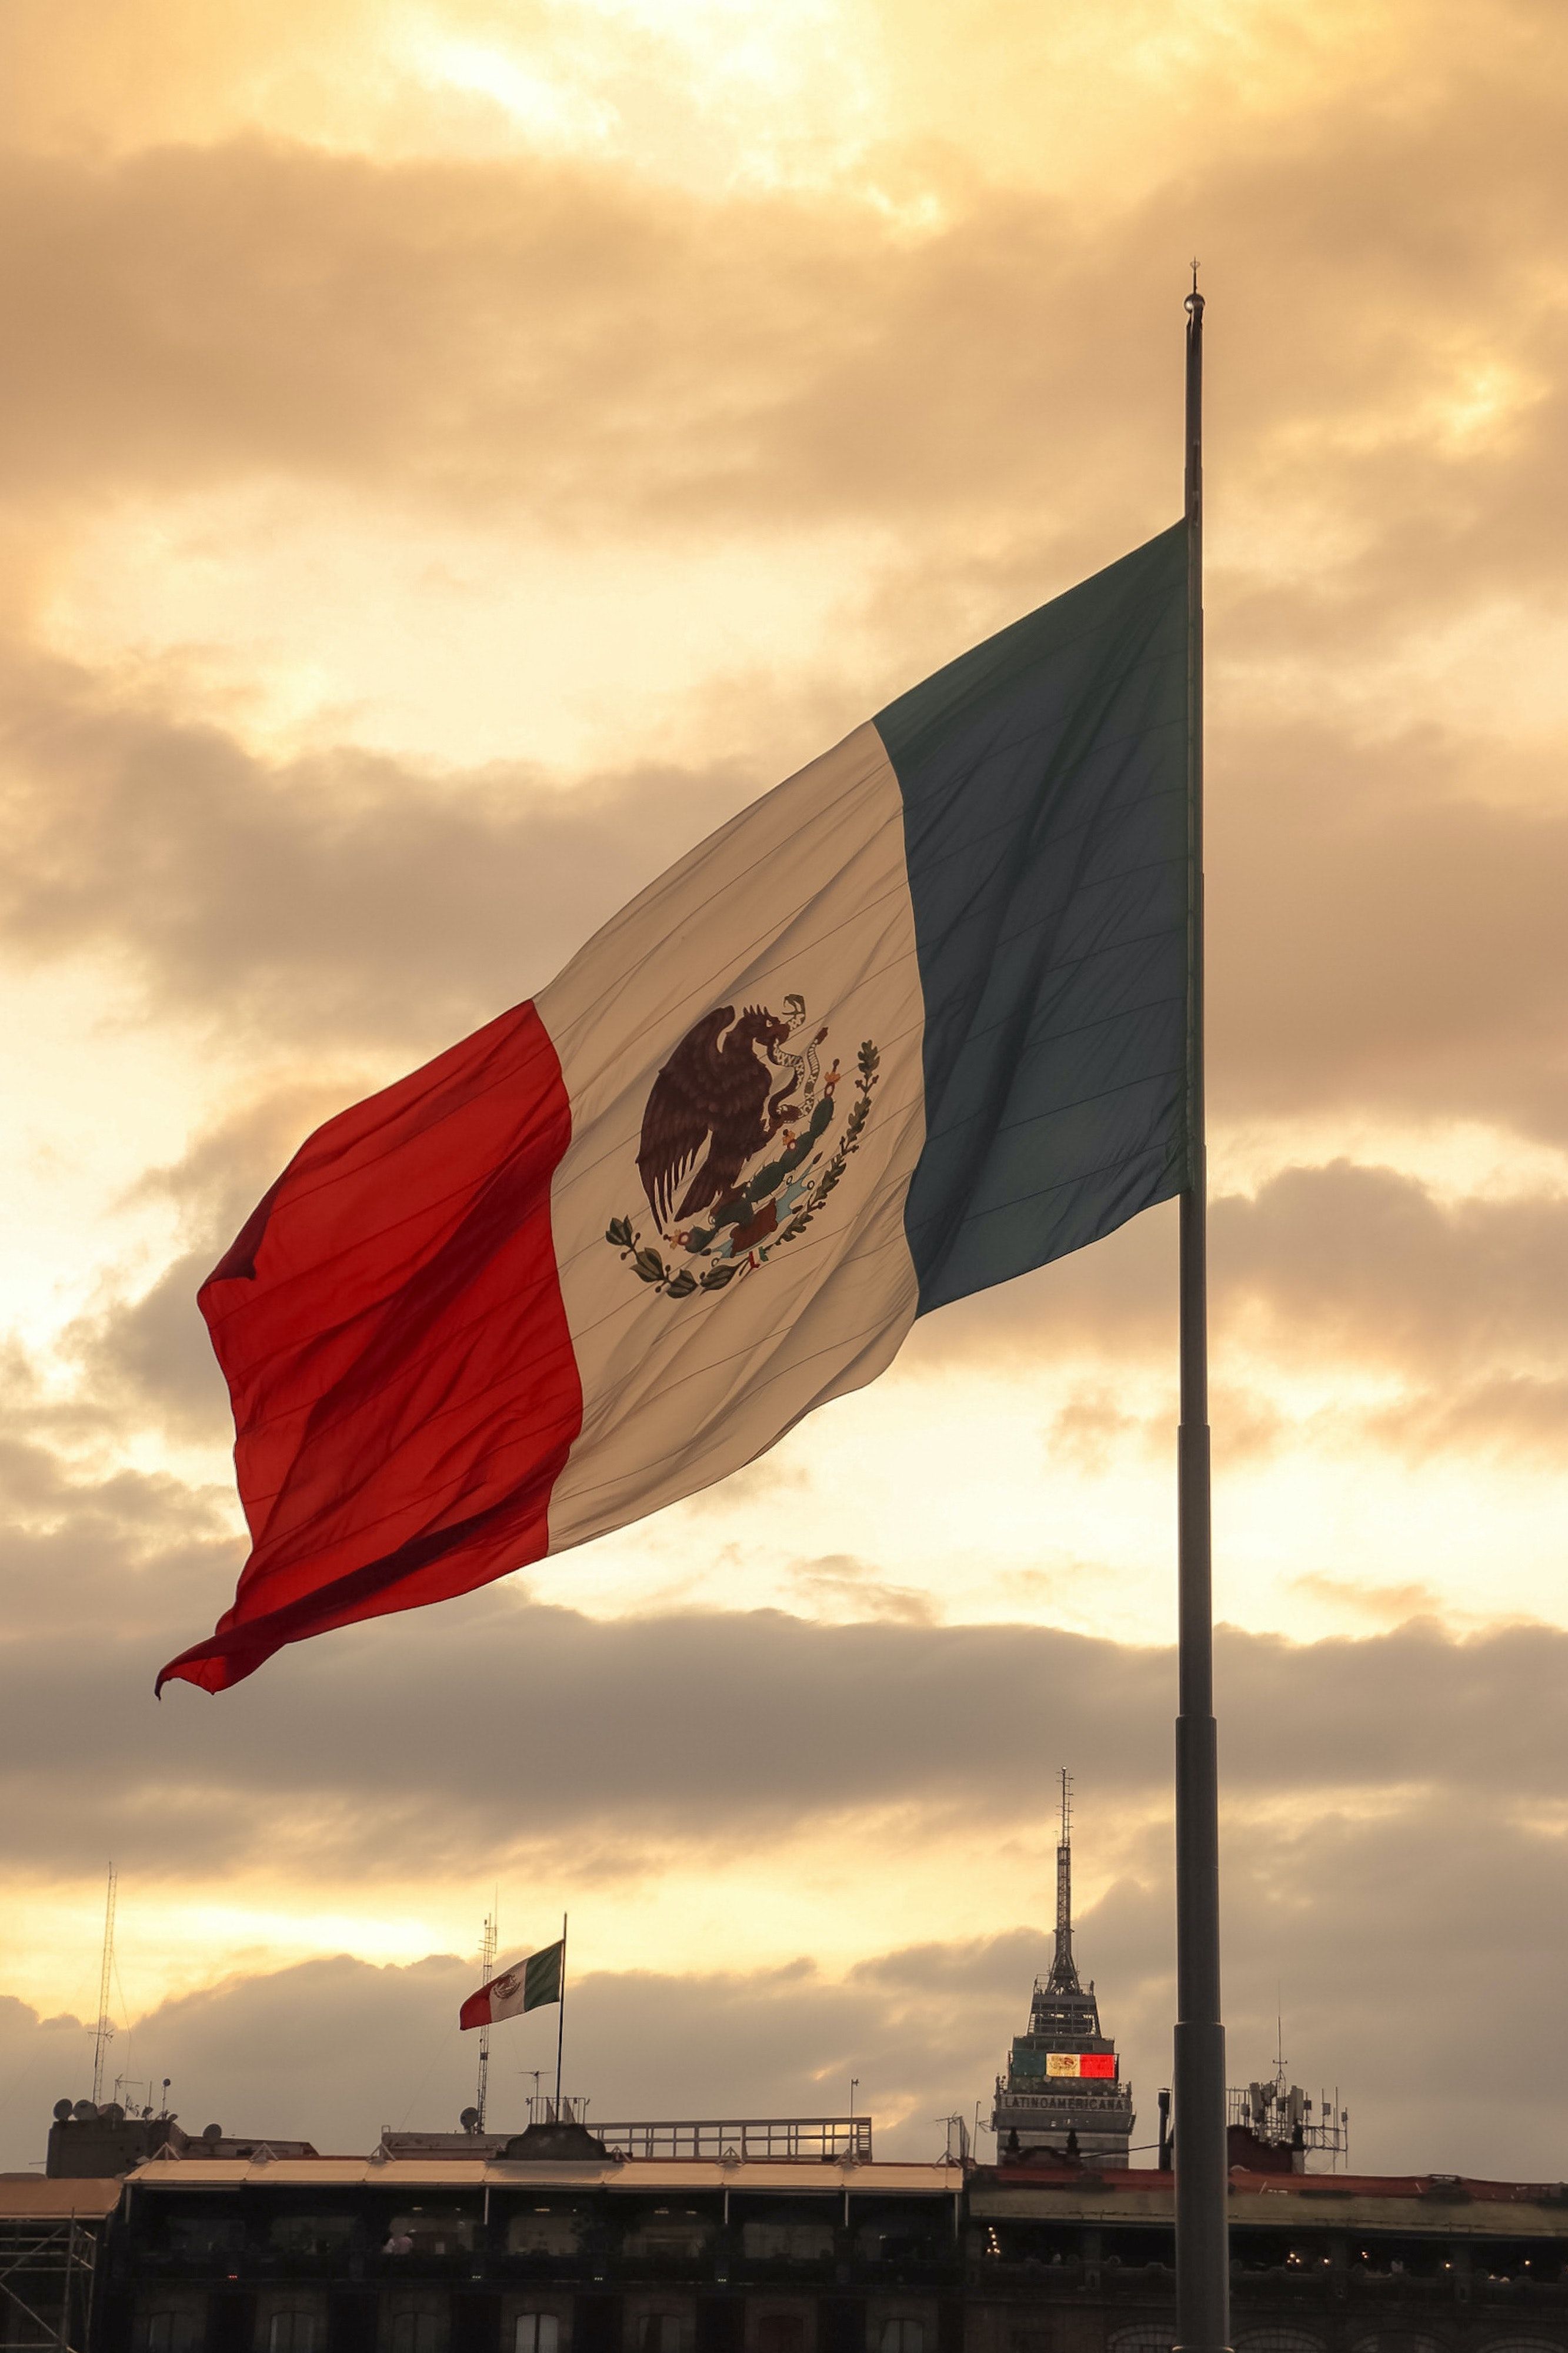 A Mexican flag waves in the wind in front of a cloudy sky. - Mexico